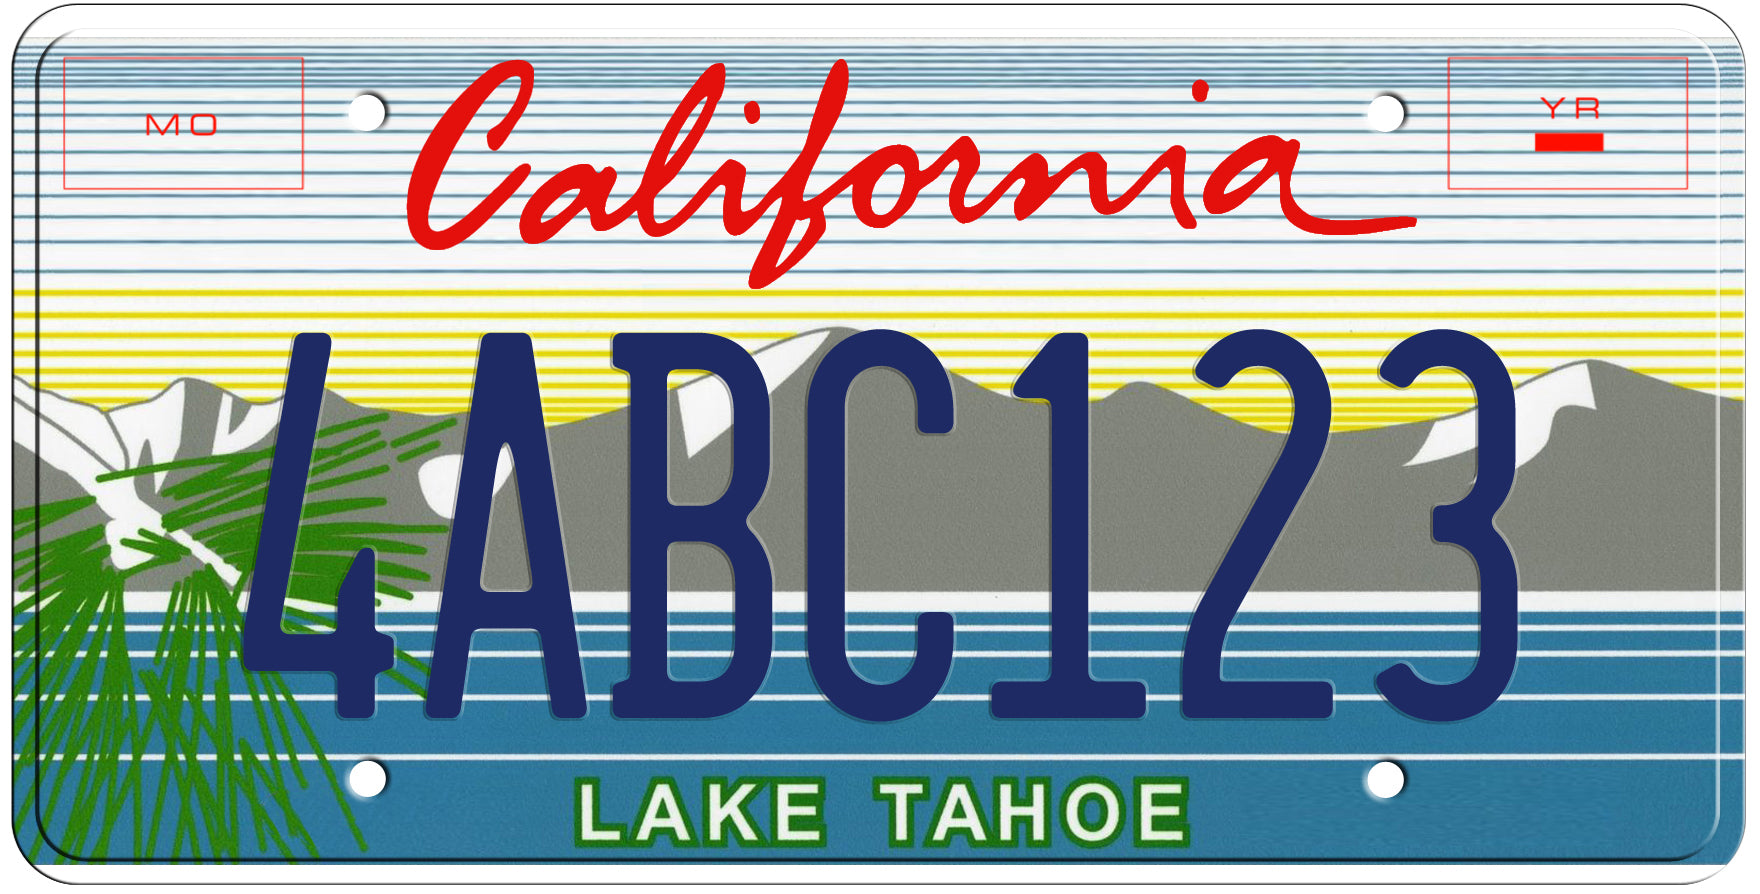 3XXY986, License plate without vehicle (California) License plate of the USA